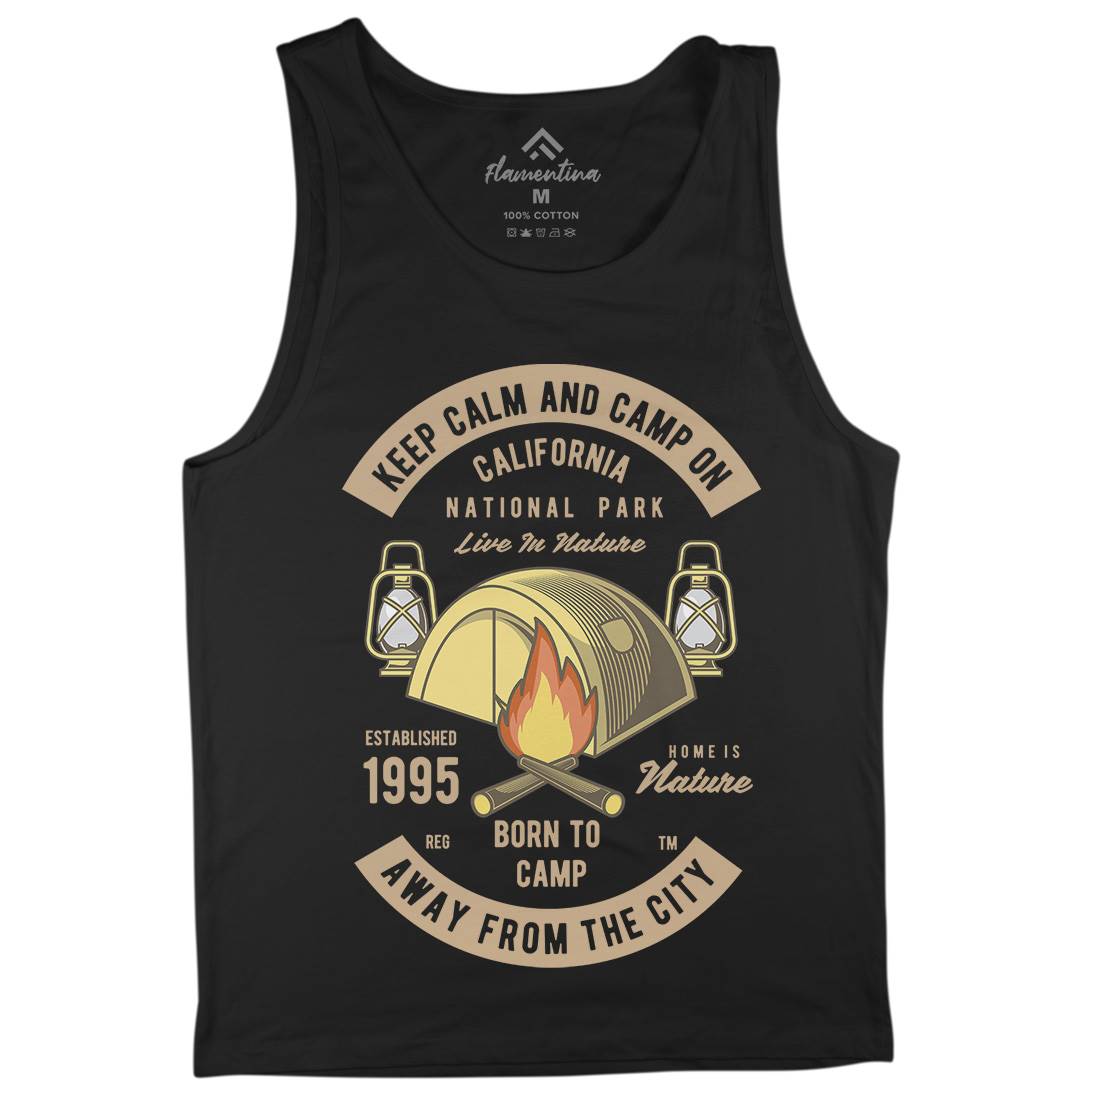 Keep Calm And Camp Mens Tank Top Vest Nature C383